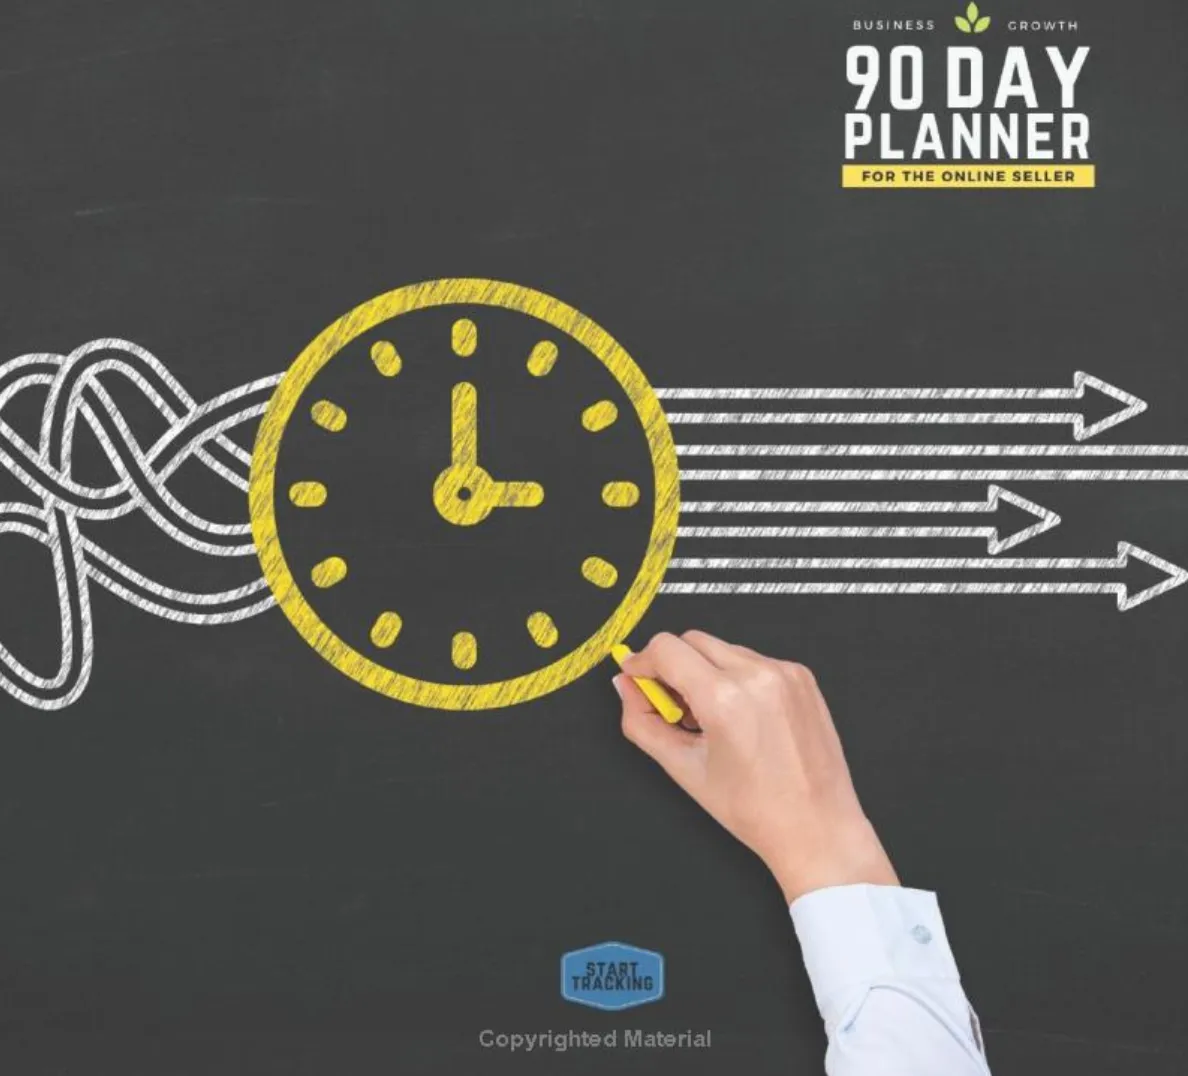 90 Day Planner front Cover Image